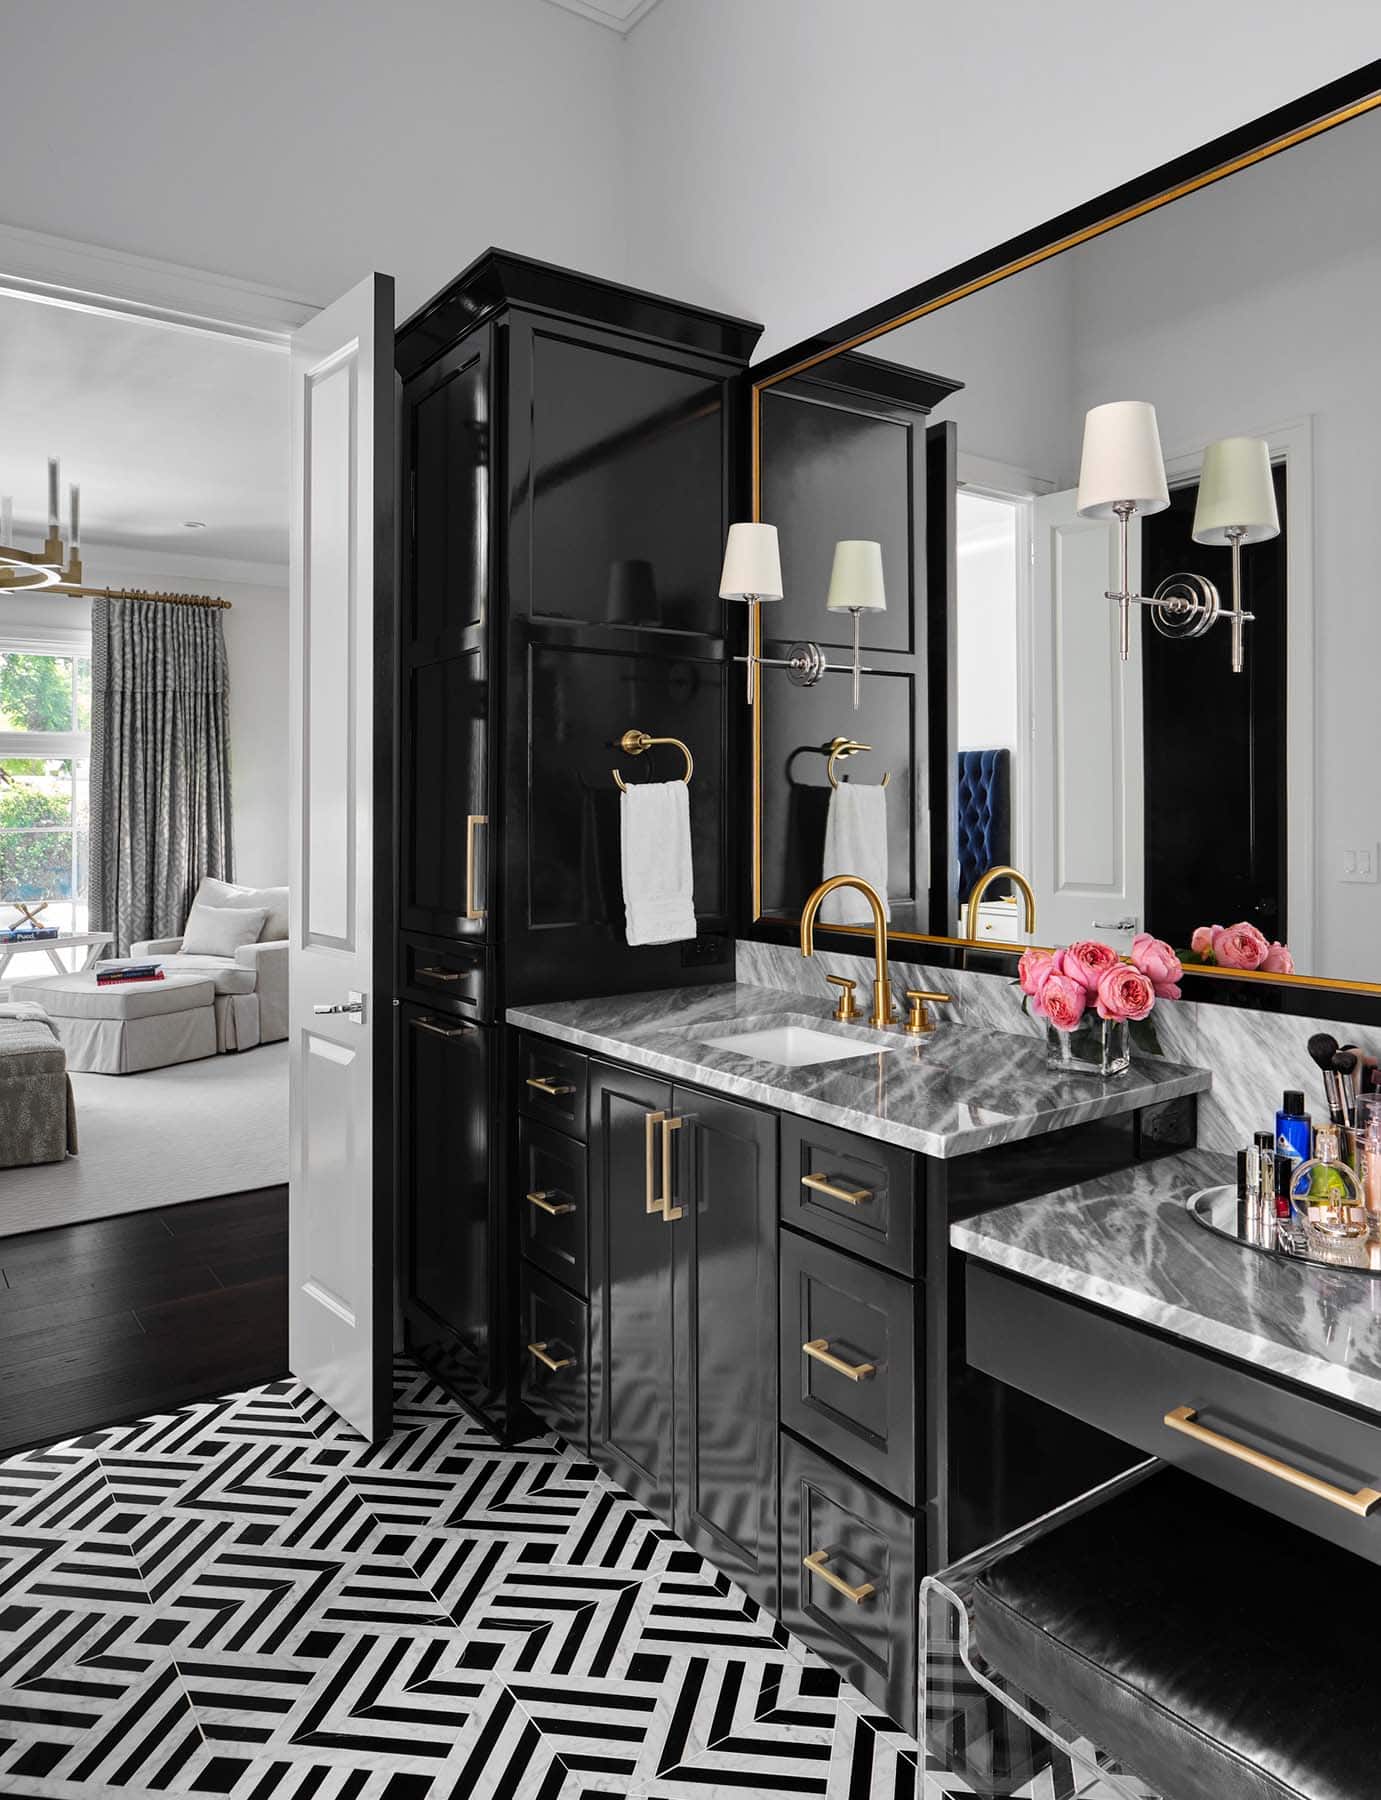 luxurious-master-bath-cabinets-painted-in-sherwin-williams-tricorn-black-high-gloss-alamo-heights-tx-home-painting